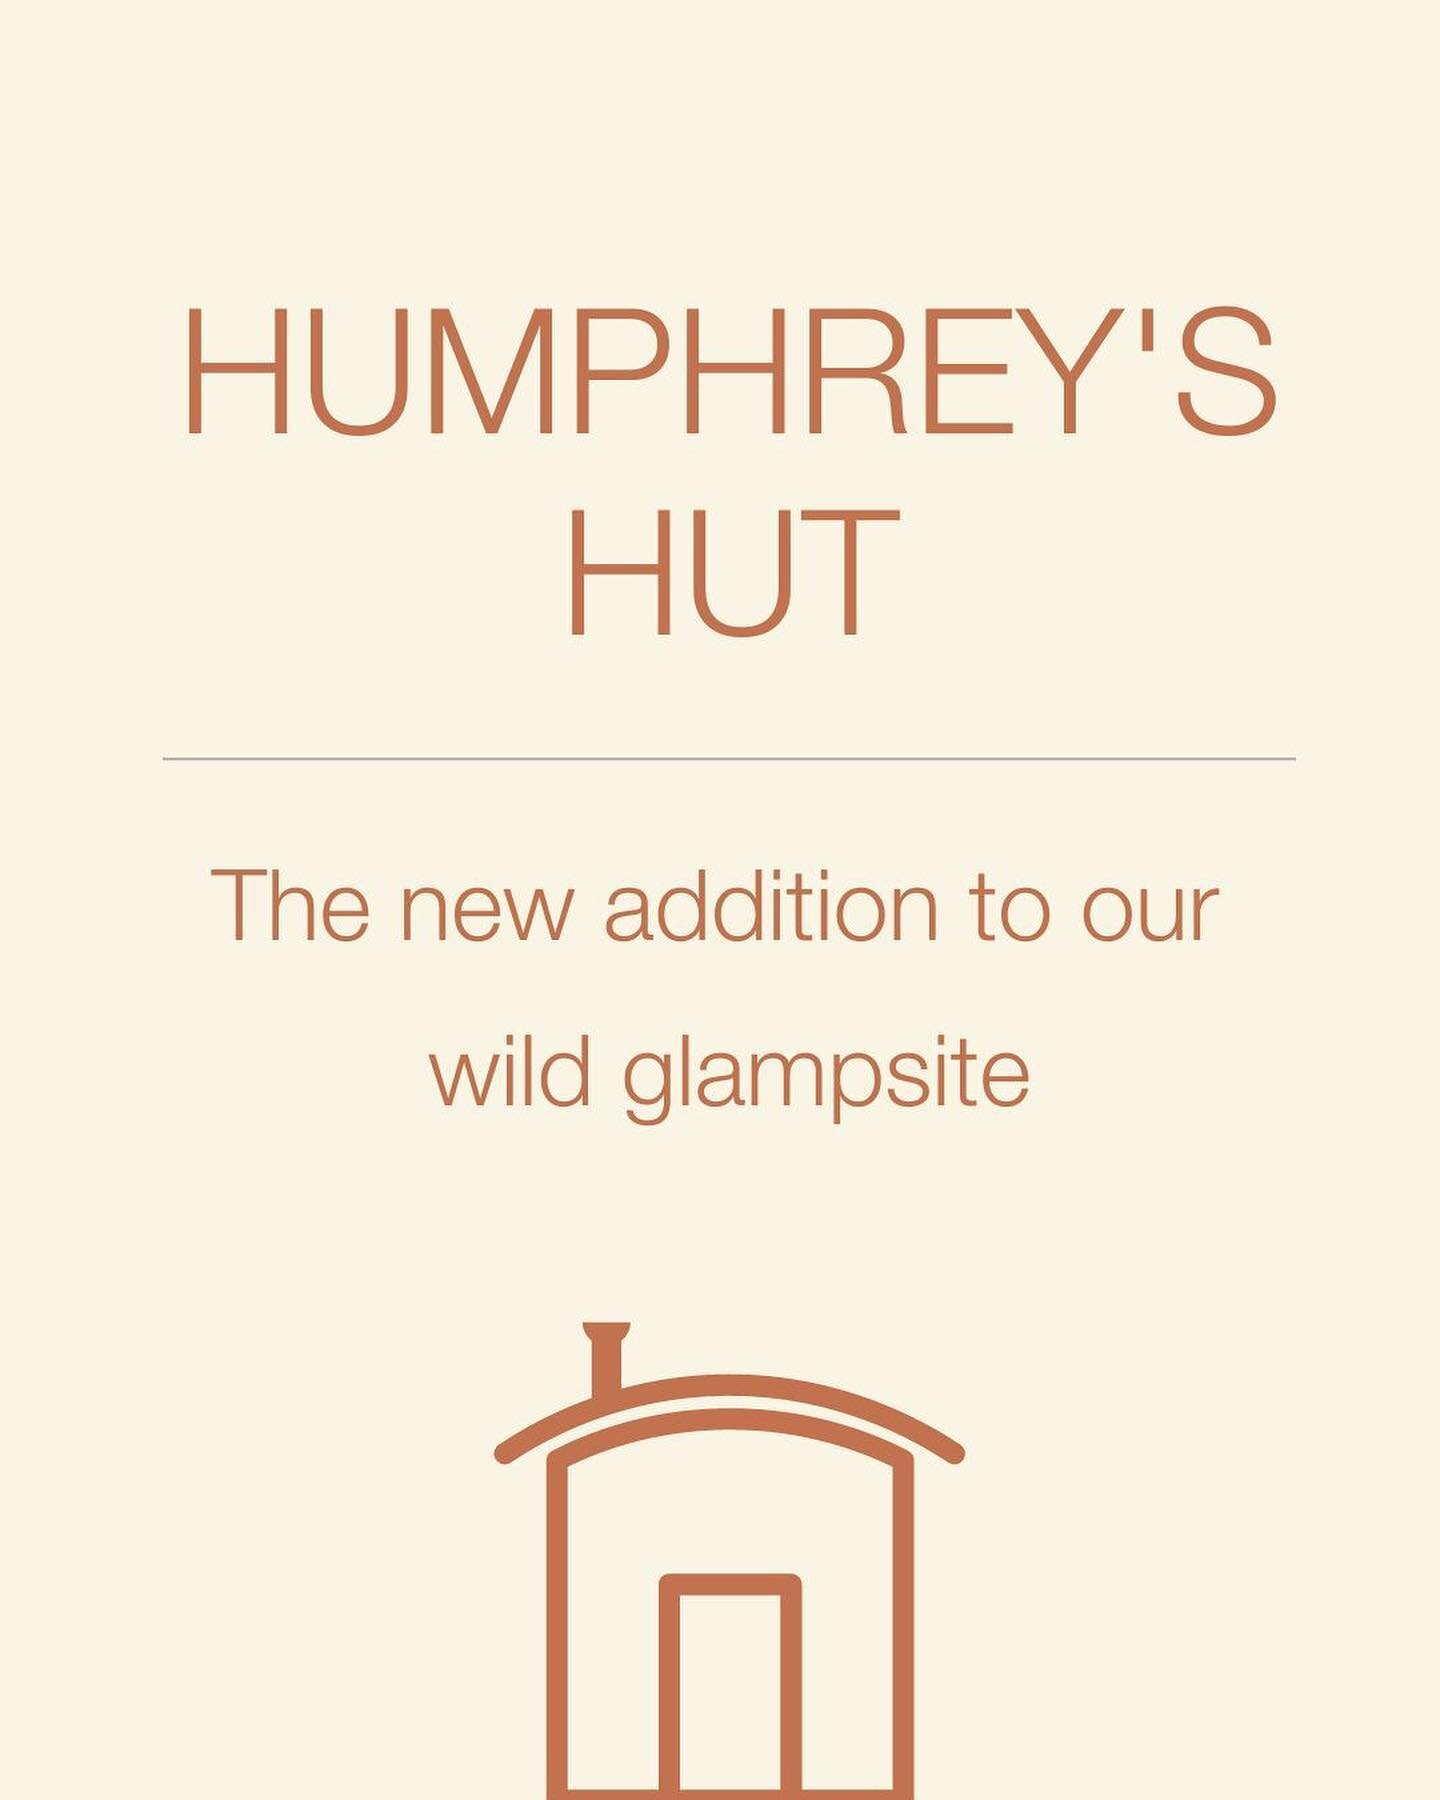 Introducing &lsquo;Humphrey&rsquo;s Hut&rsquo;, a historic shepherds hut that has been preserved and furnished by our friends - antiques dealer @holtbyandco and artist @victoriayj to provide our guests with a truly special place to stay. 

With all t